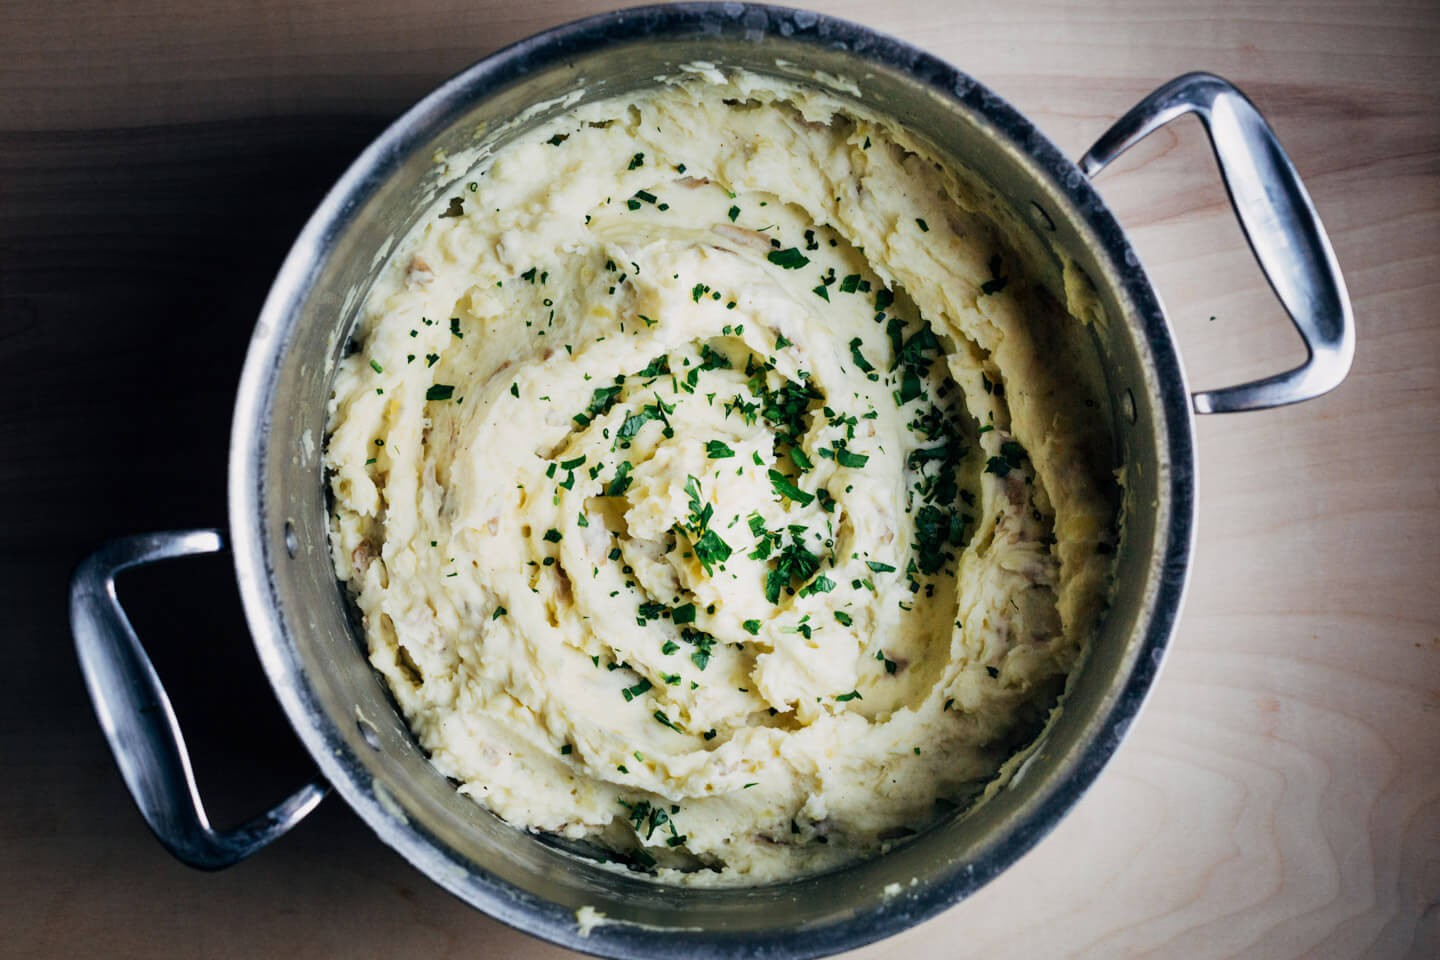 A big pot of mashed potatoes with herbs